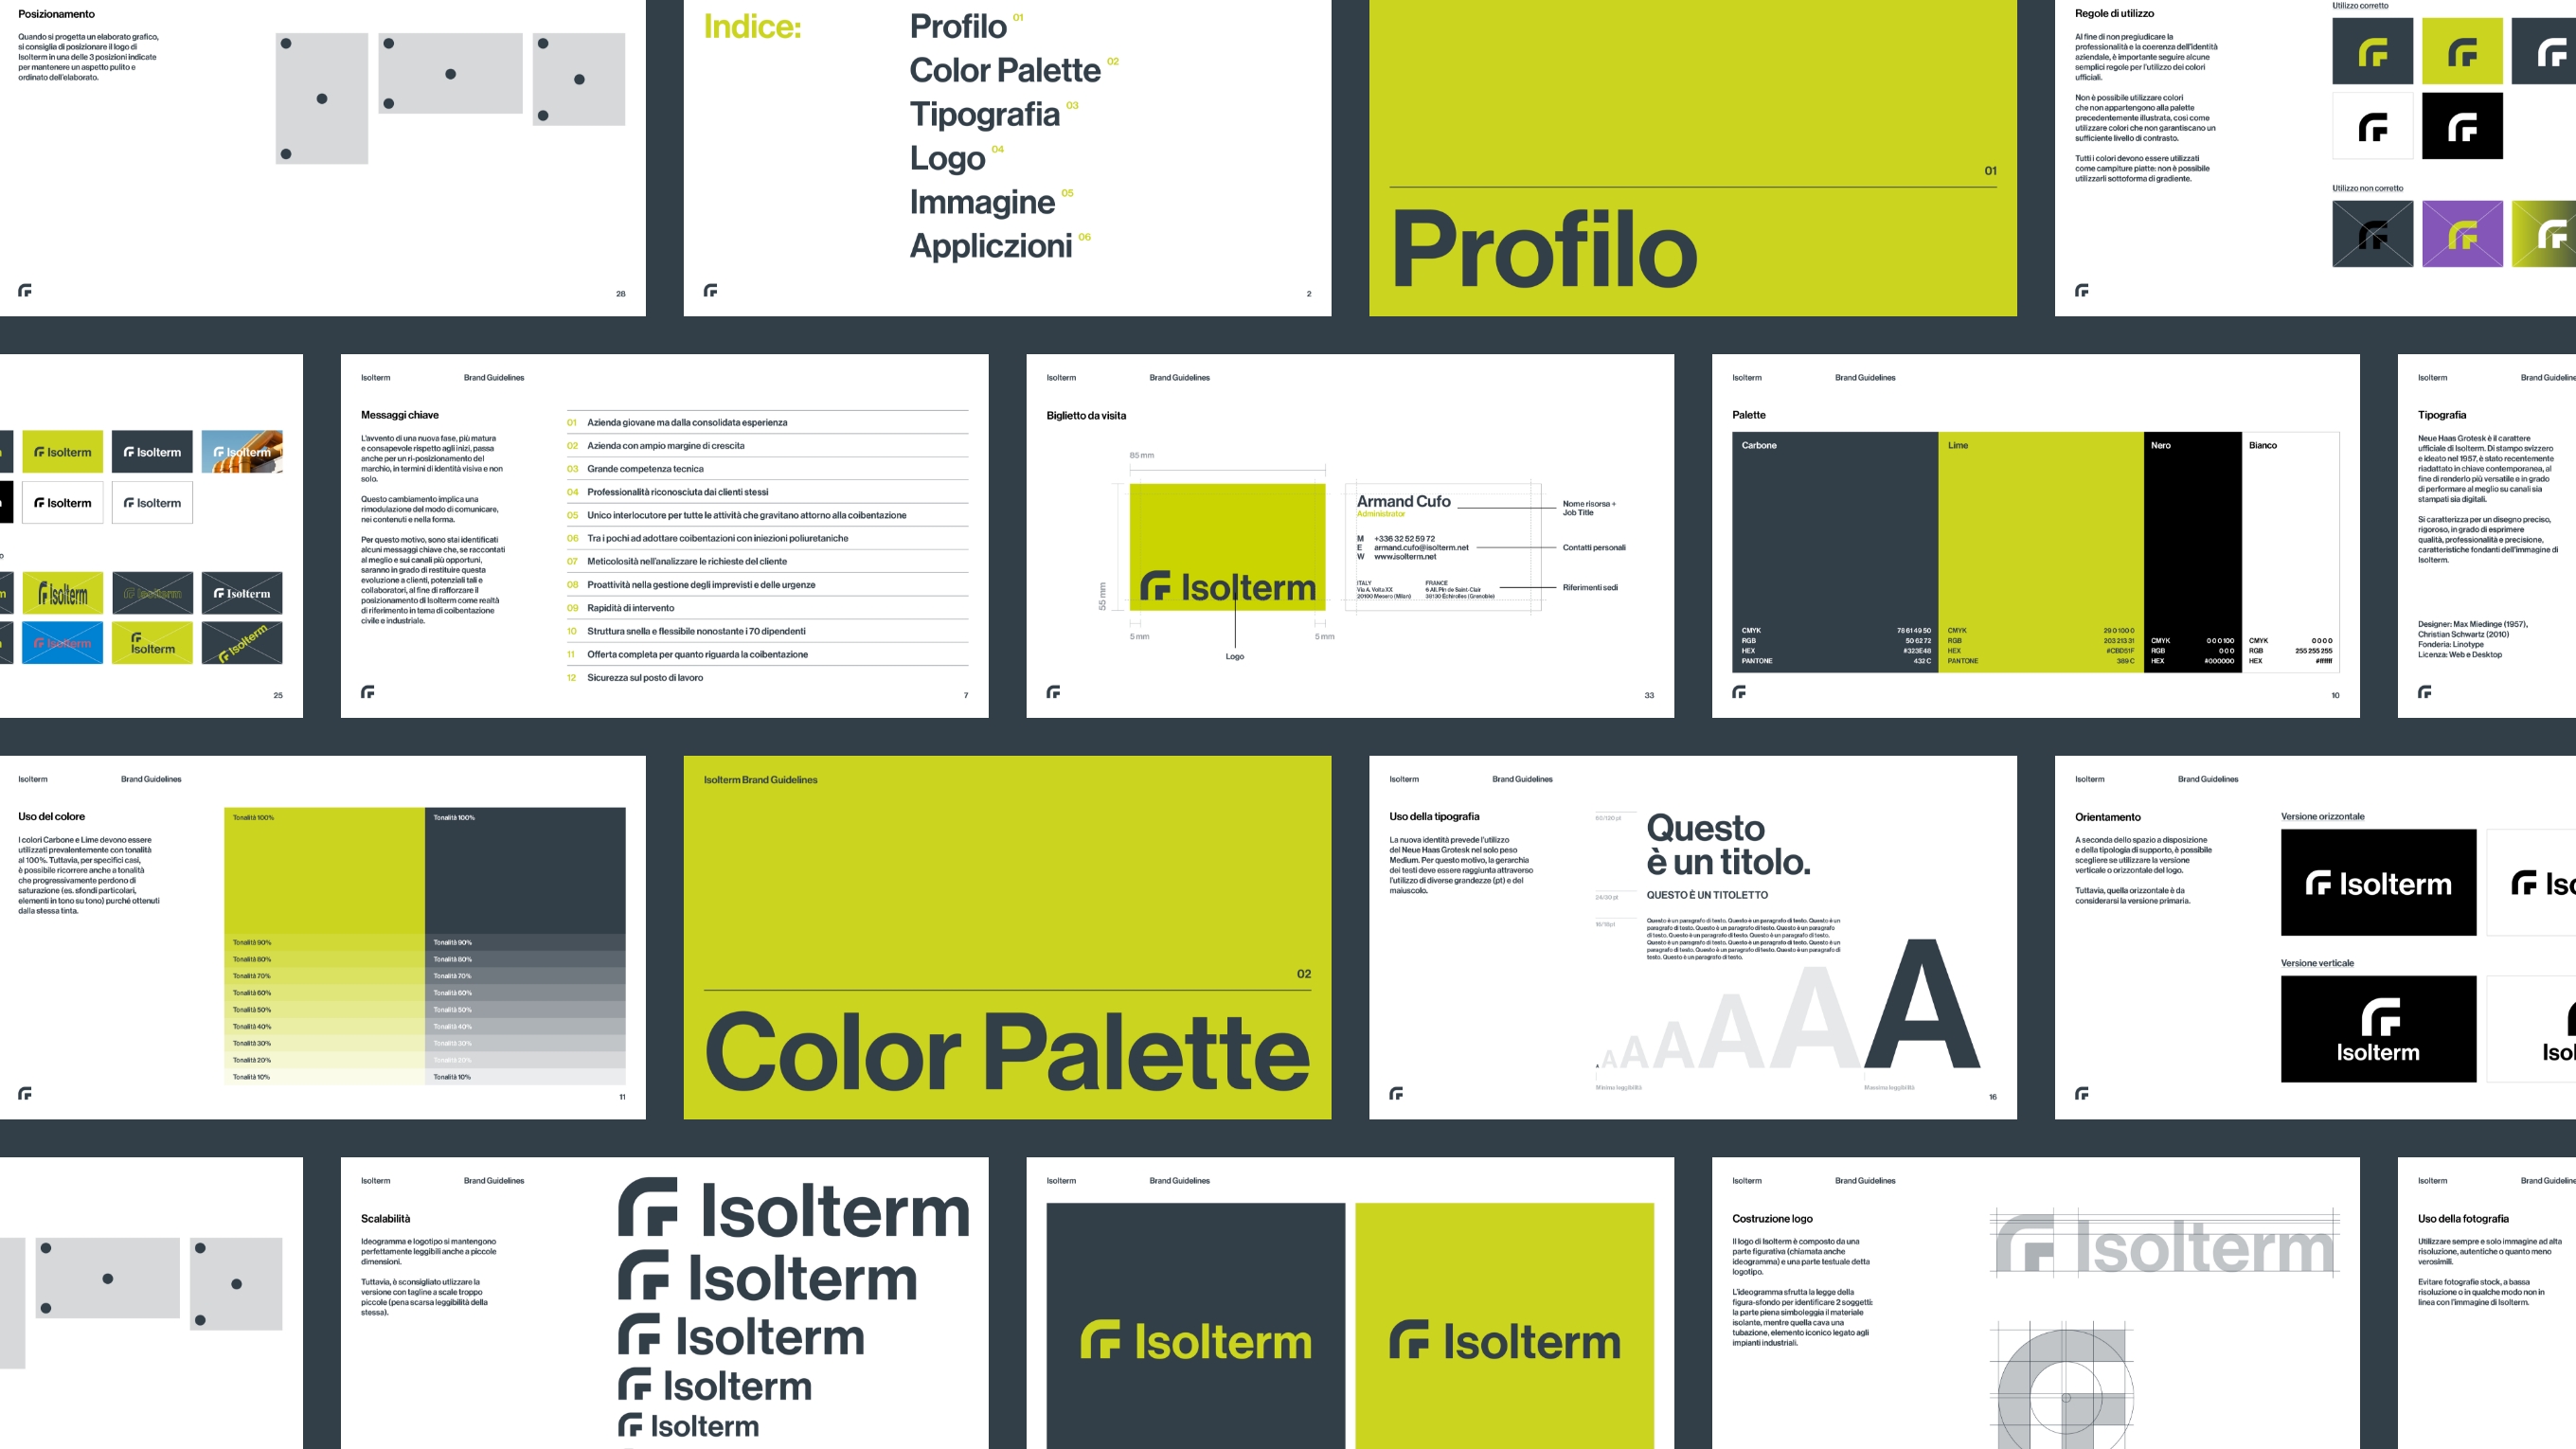 Isolterm brand manual